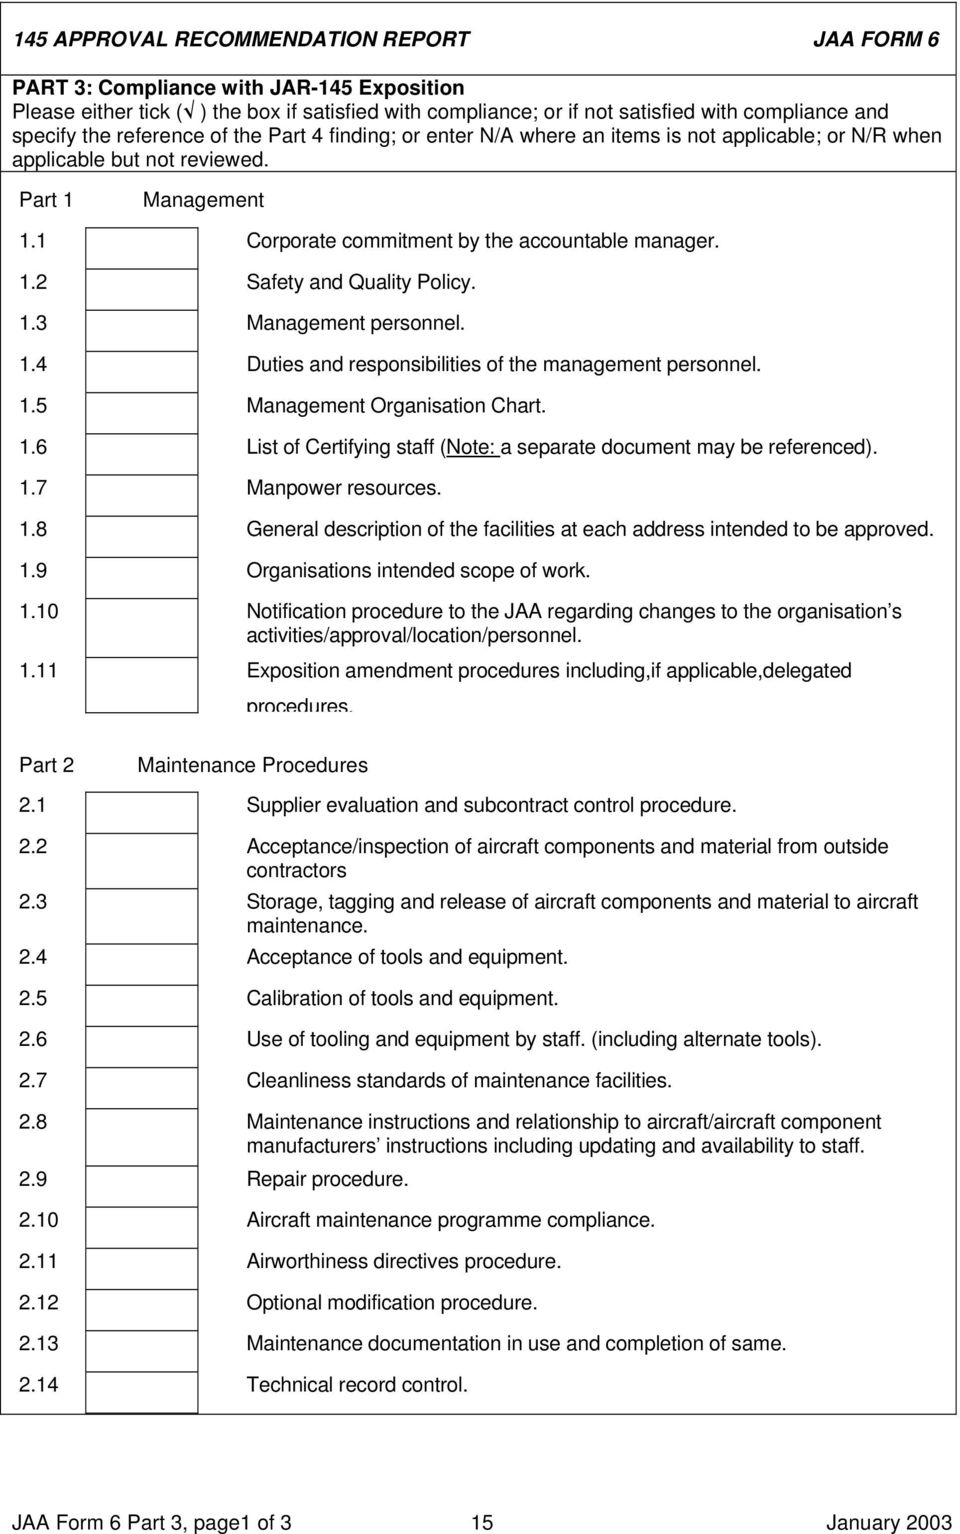 1.3 Management personnel. 1.4 Duties and responsibilities of the management personnel. 1.5 Management Organisation Chart. 1.6 List of Certifying staff (Note: a separate document may be referenced). 1.7 Manpower resources.